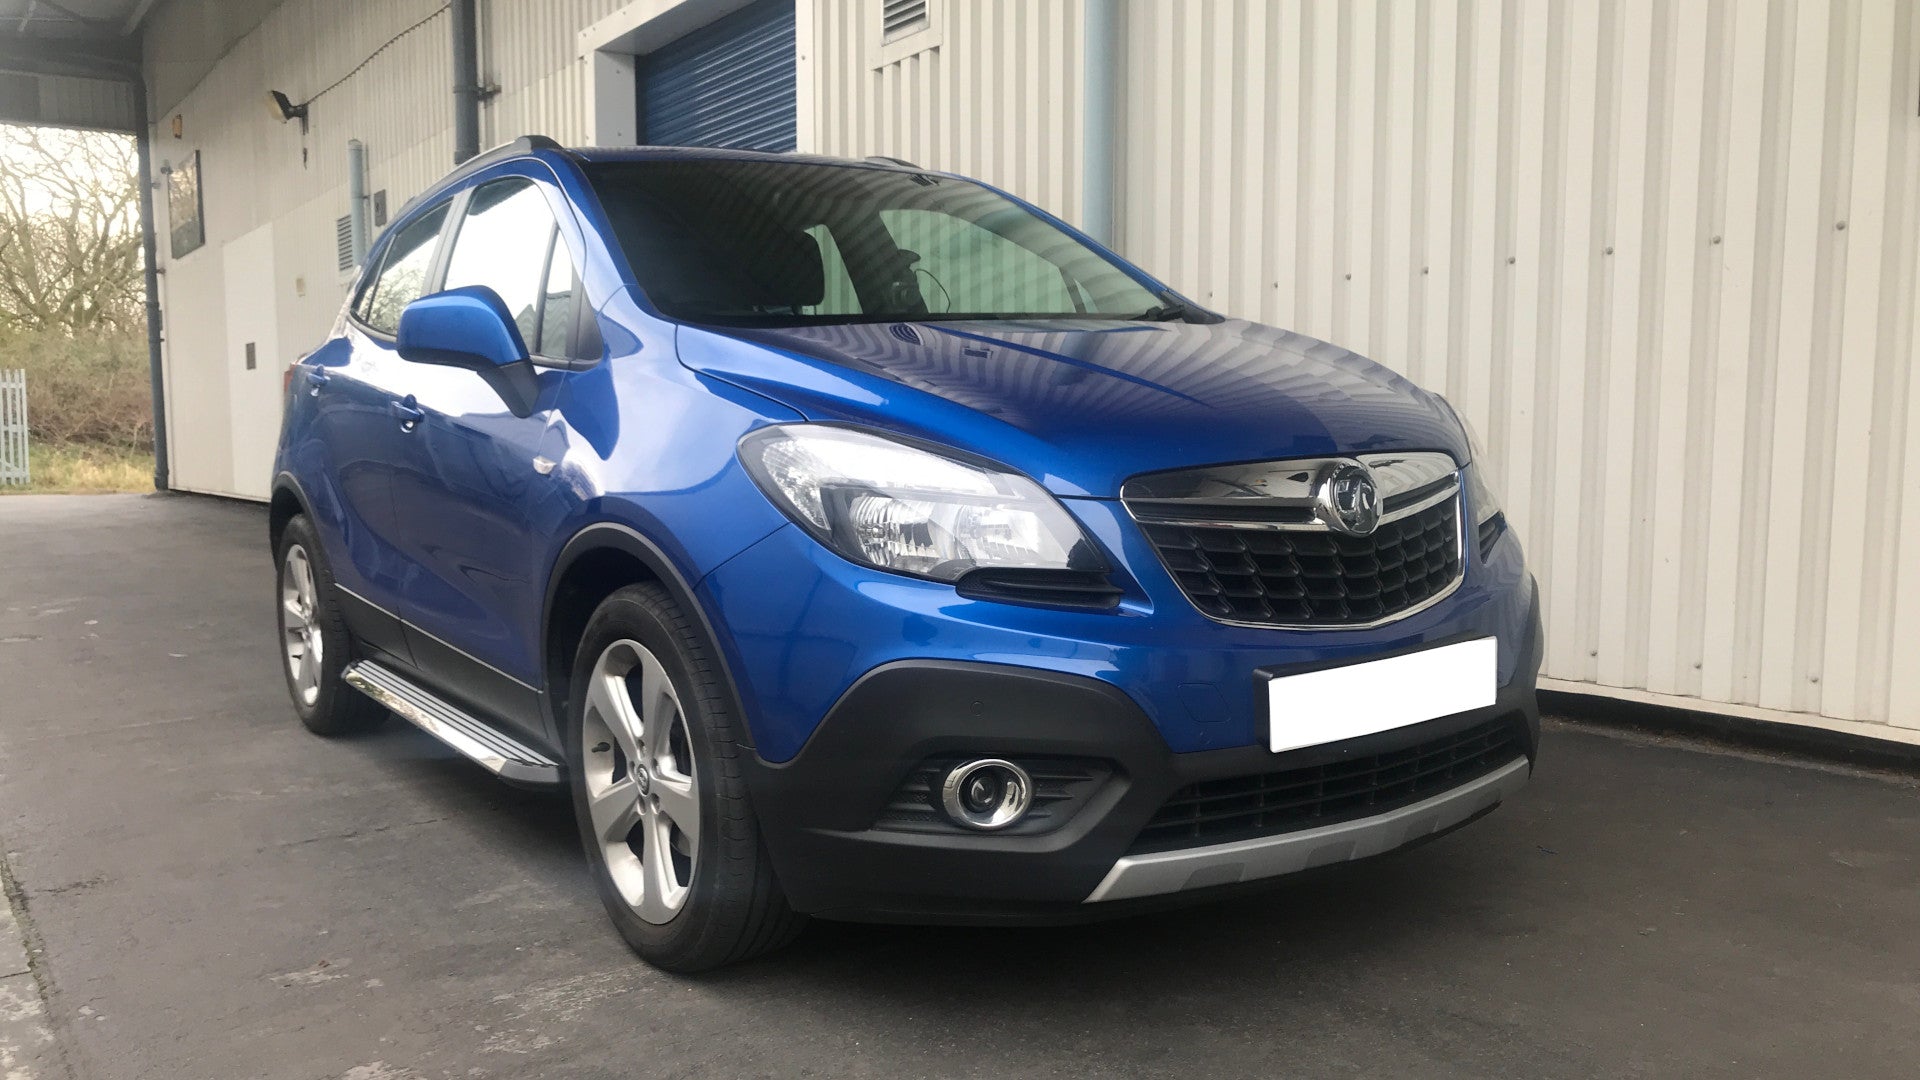 Direct4x4 Accessories for Vauxhall Opel Vehicles